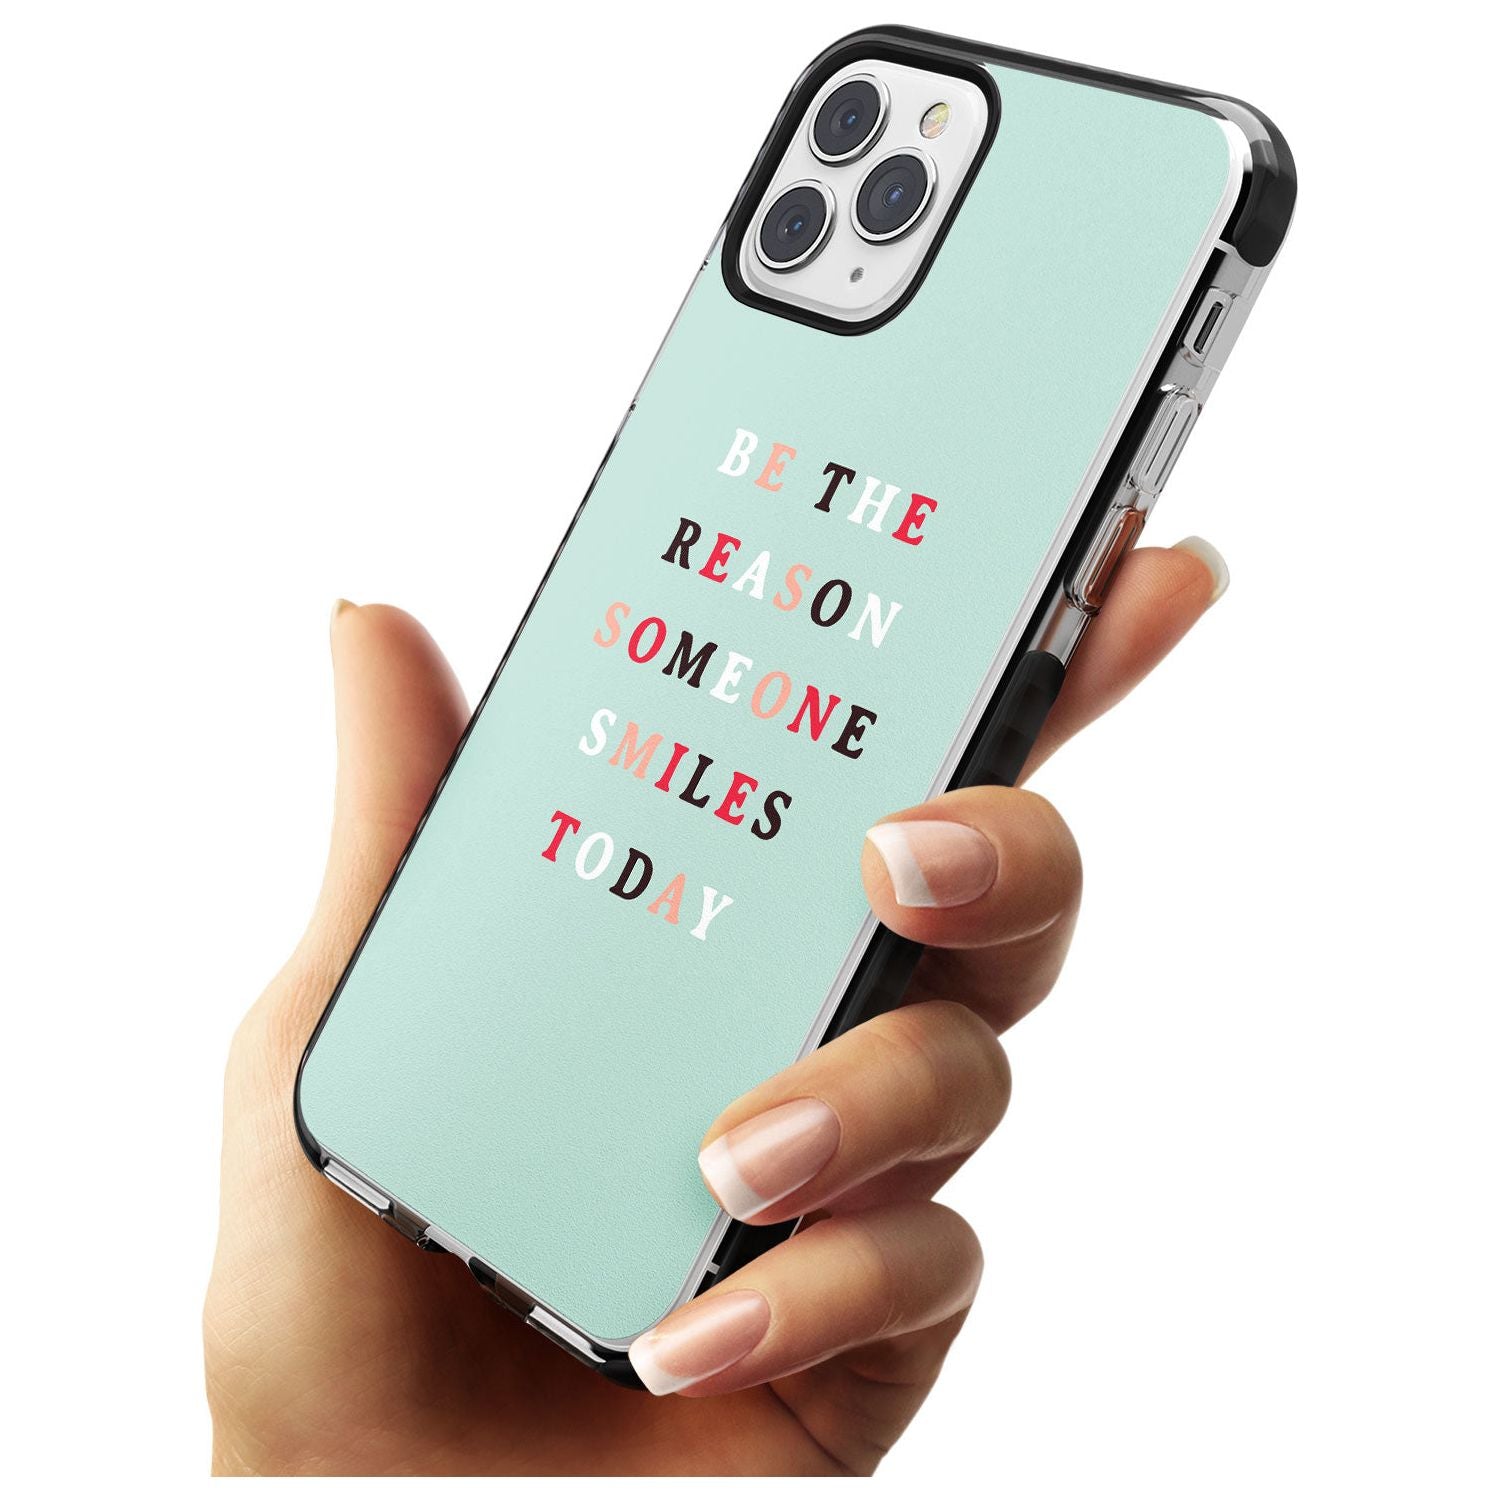 Be the reason someone smiles Black Impact Phone Case for iPhone 11 Pro Max